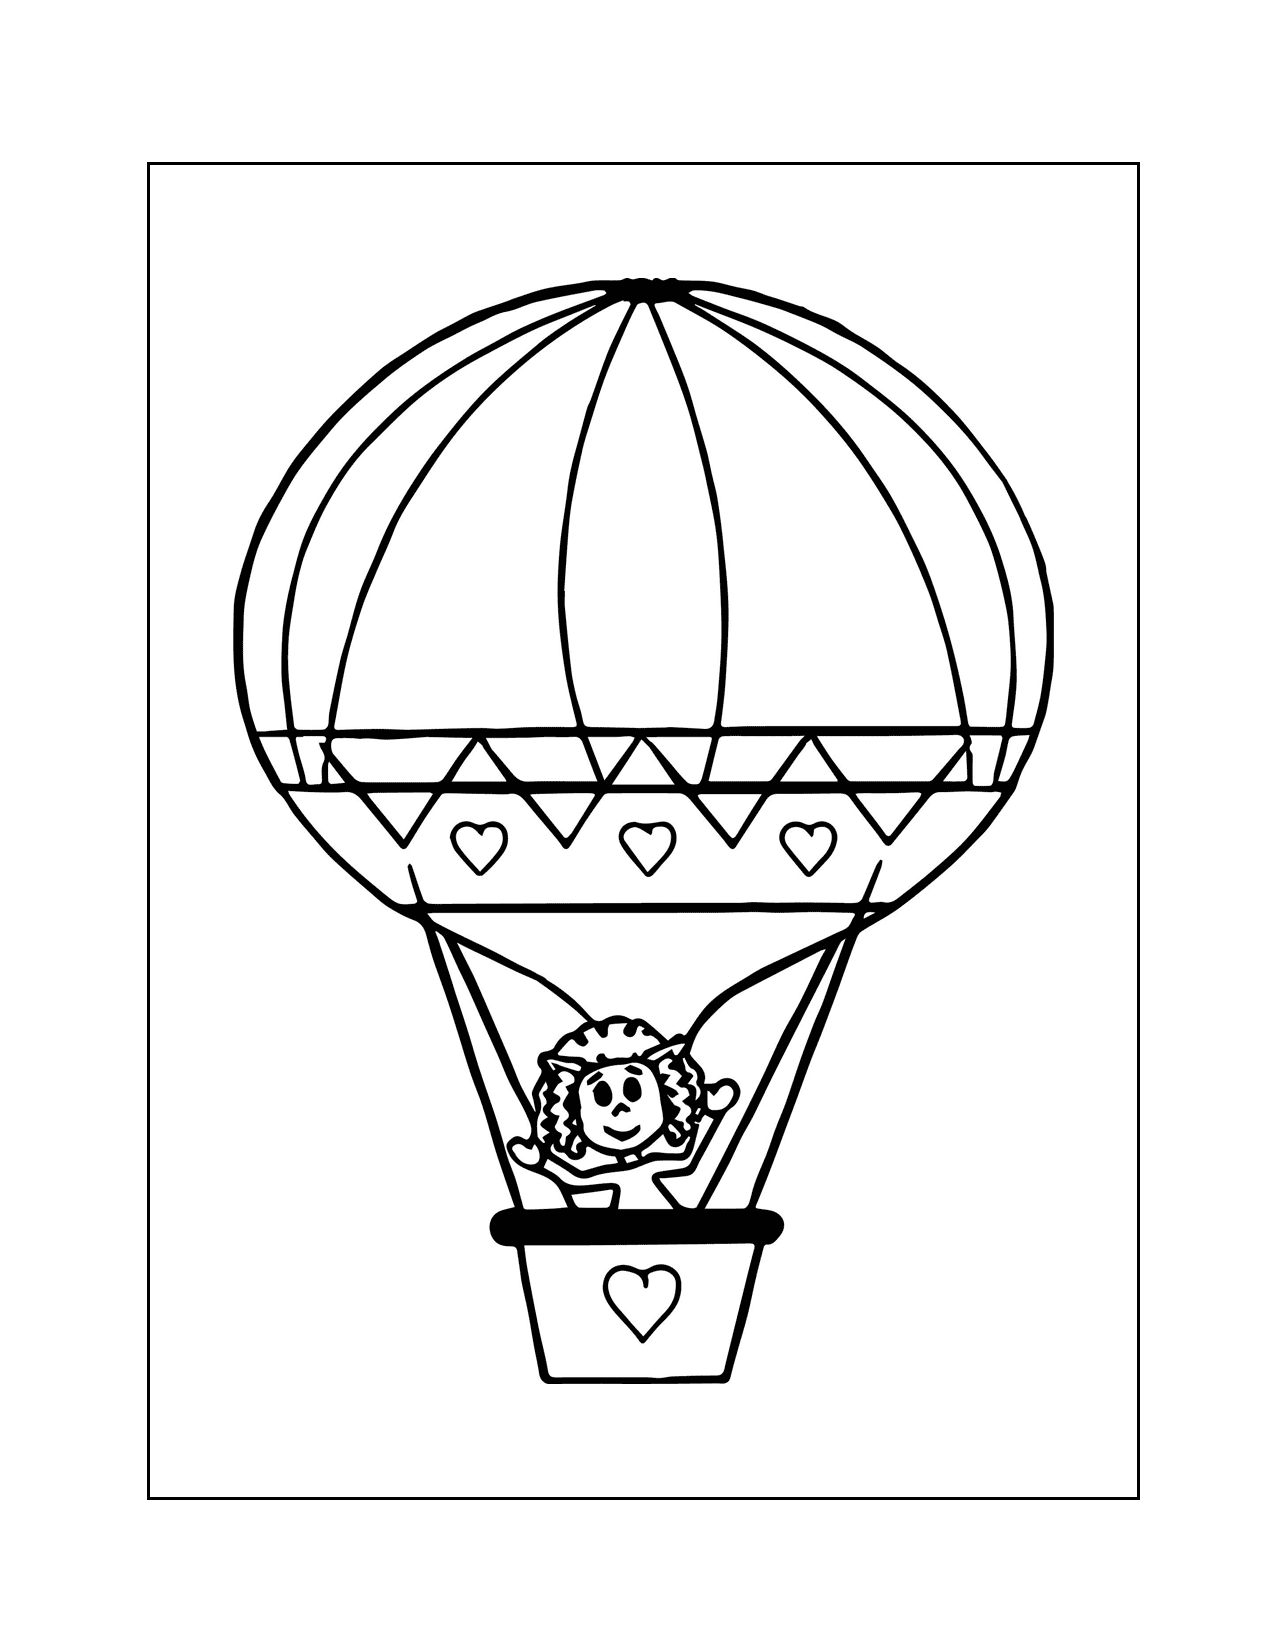 Girl In Hot Air Balloon Coloring Page